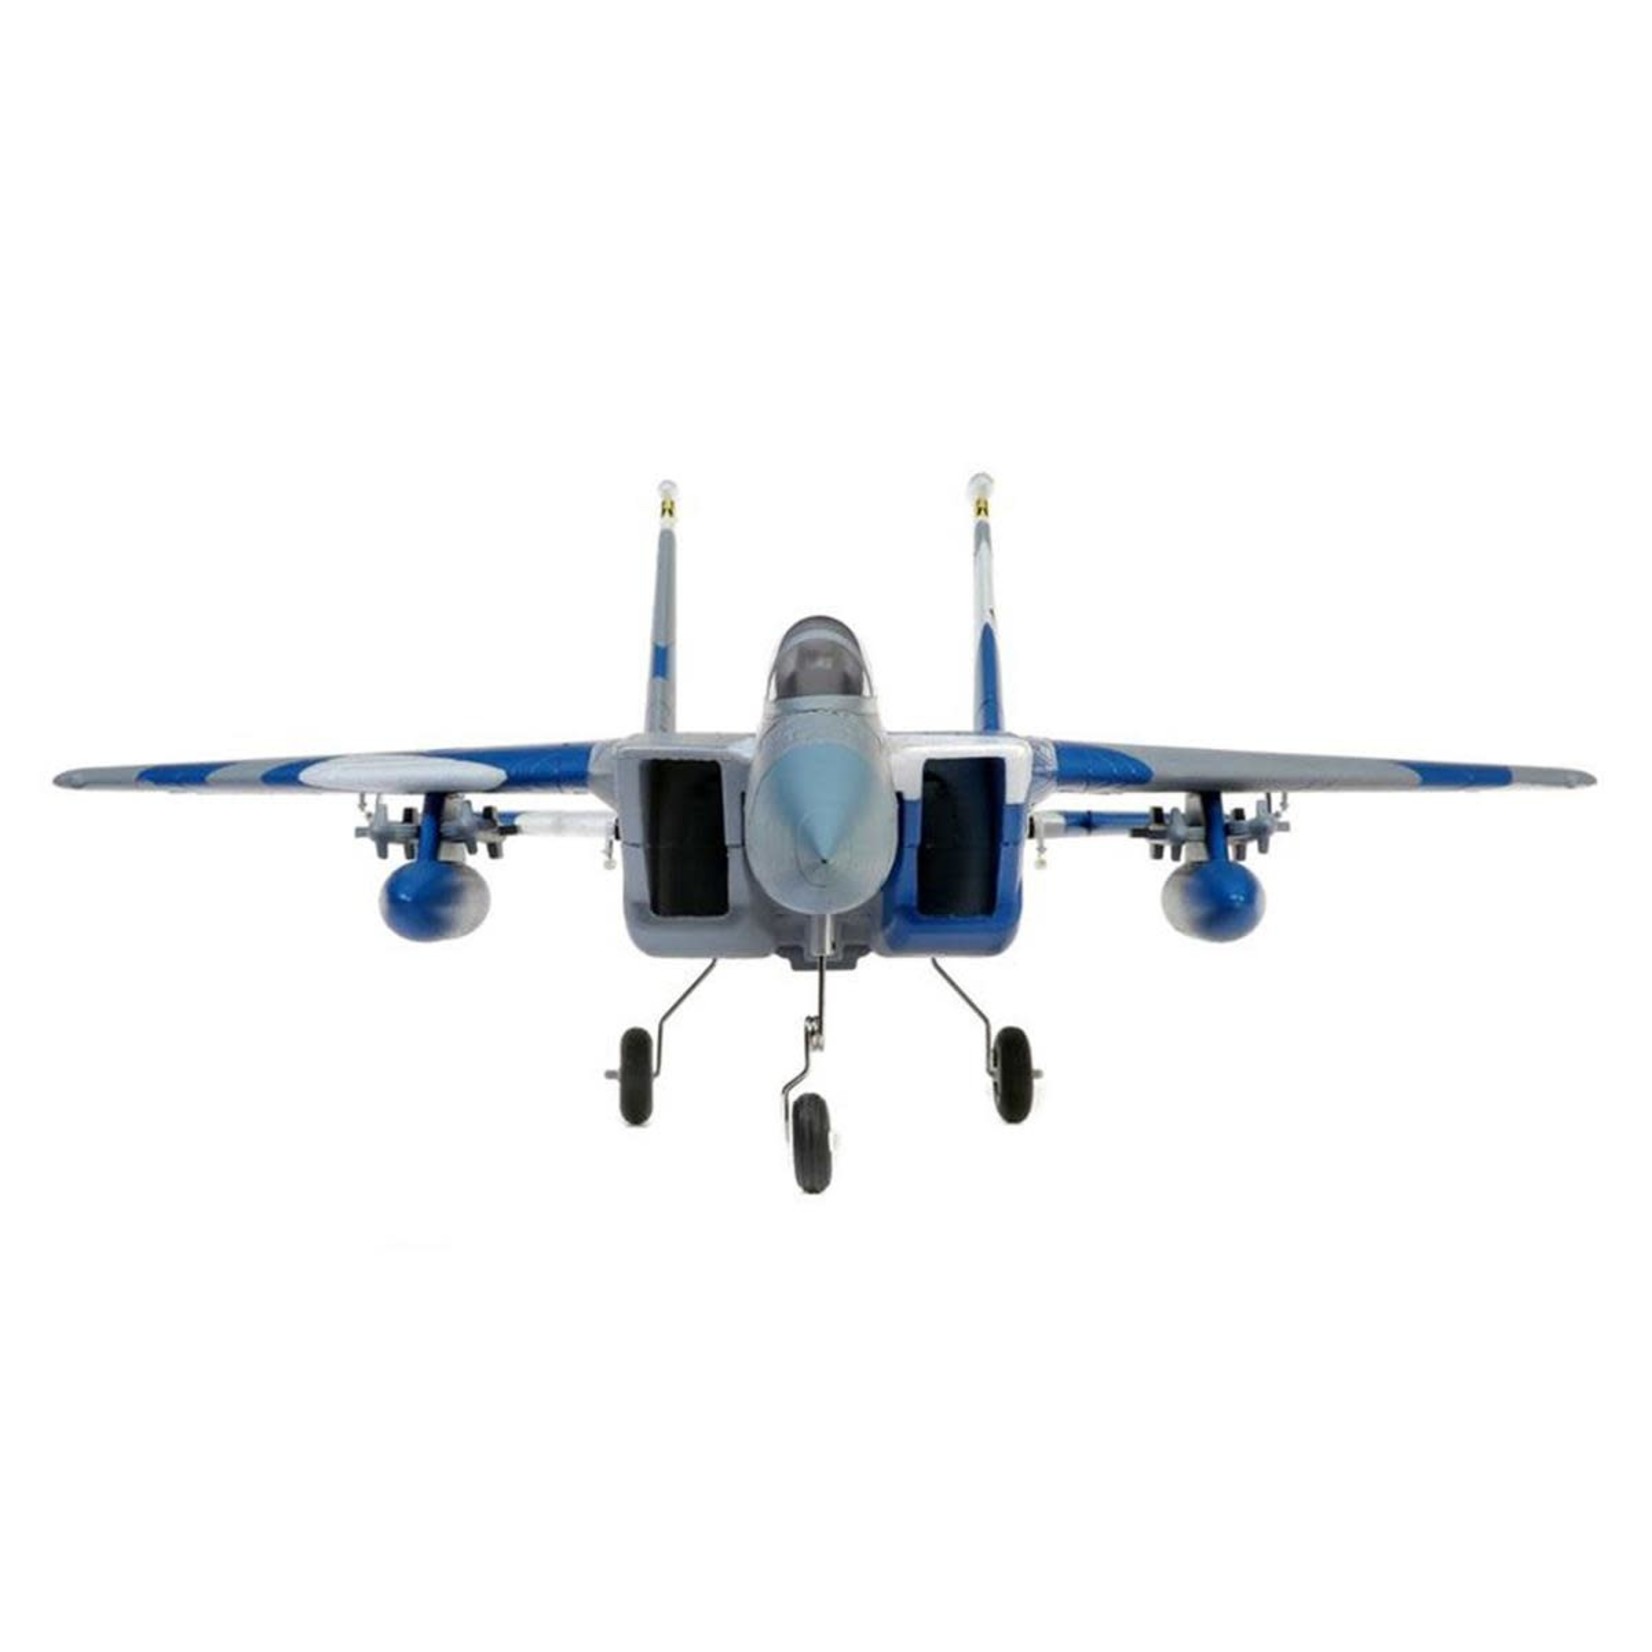 E-flite E-flite F-15 Eagle 64mm EDF BNF Basic Electric Ducted Fan Jet (715mm) w/AS3X & SAFE Technology #EFL97500